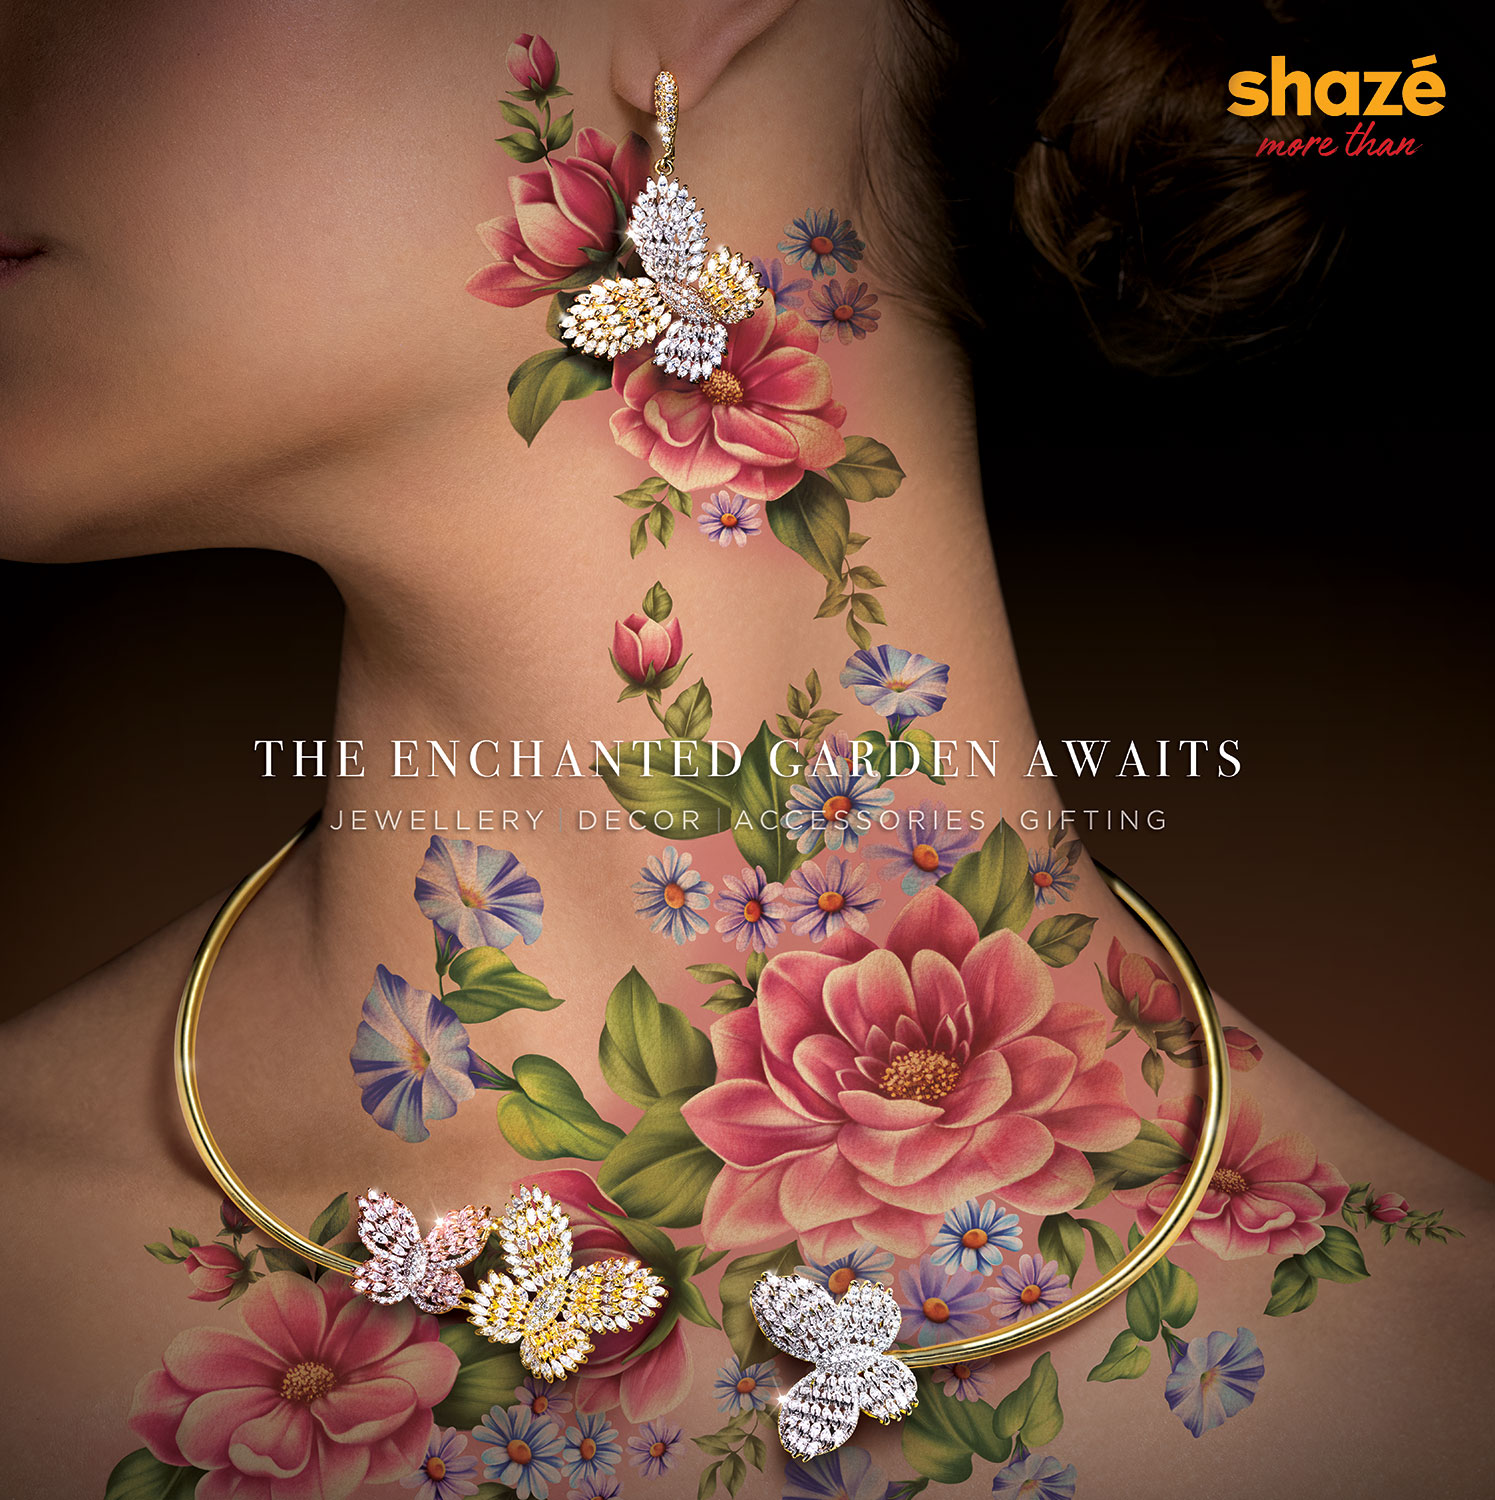 Creative Jewellery Photography with model for Shaze India